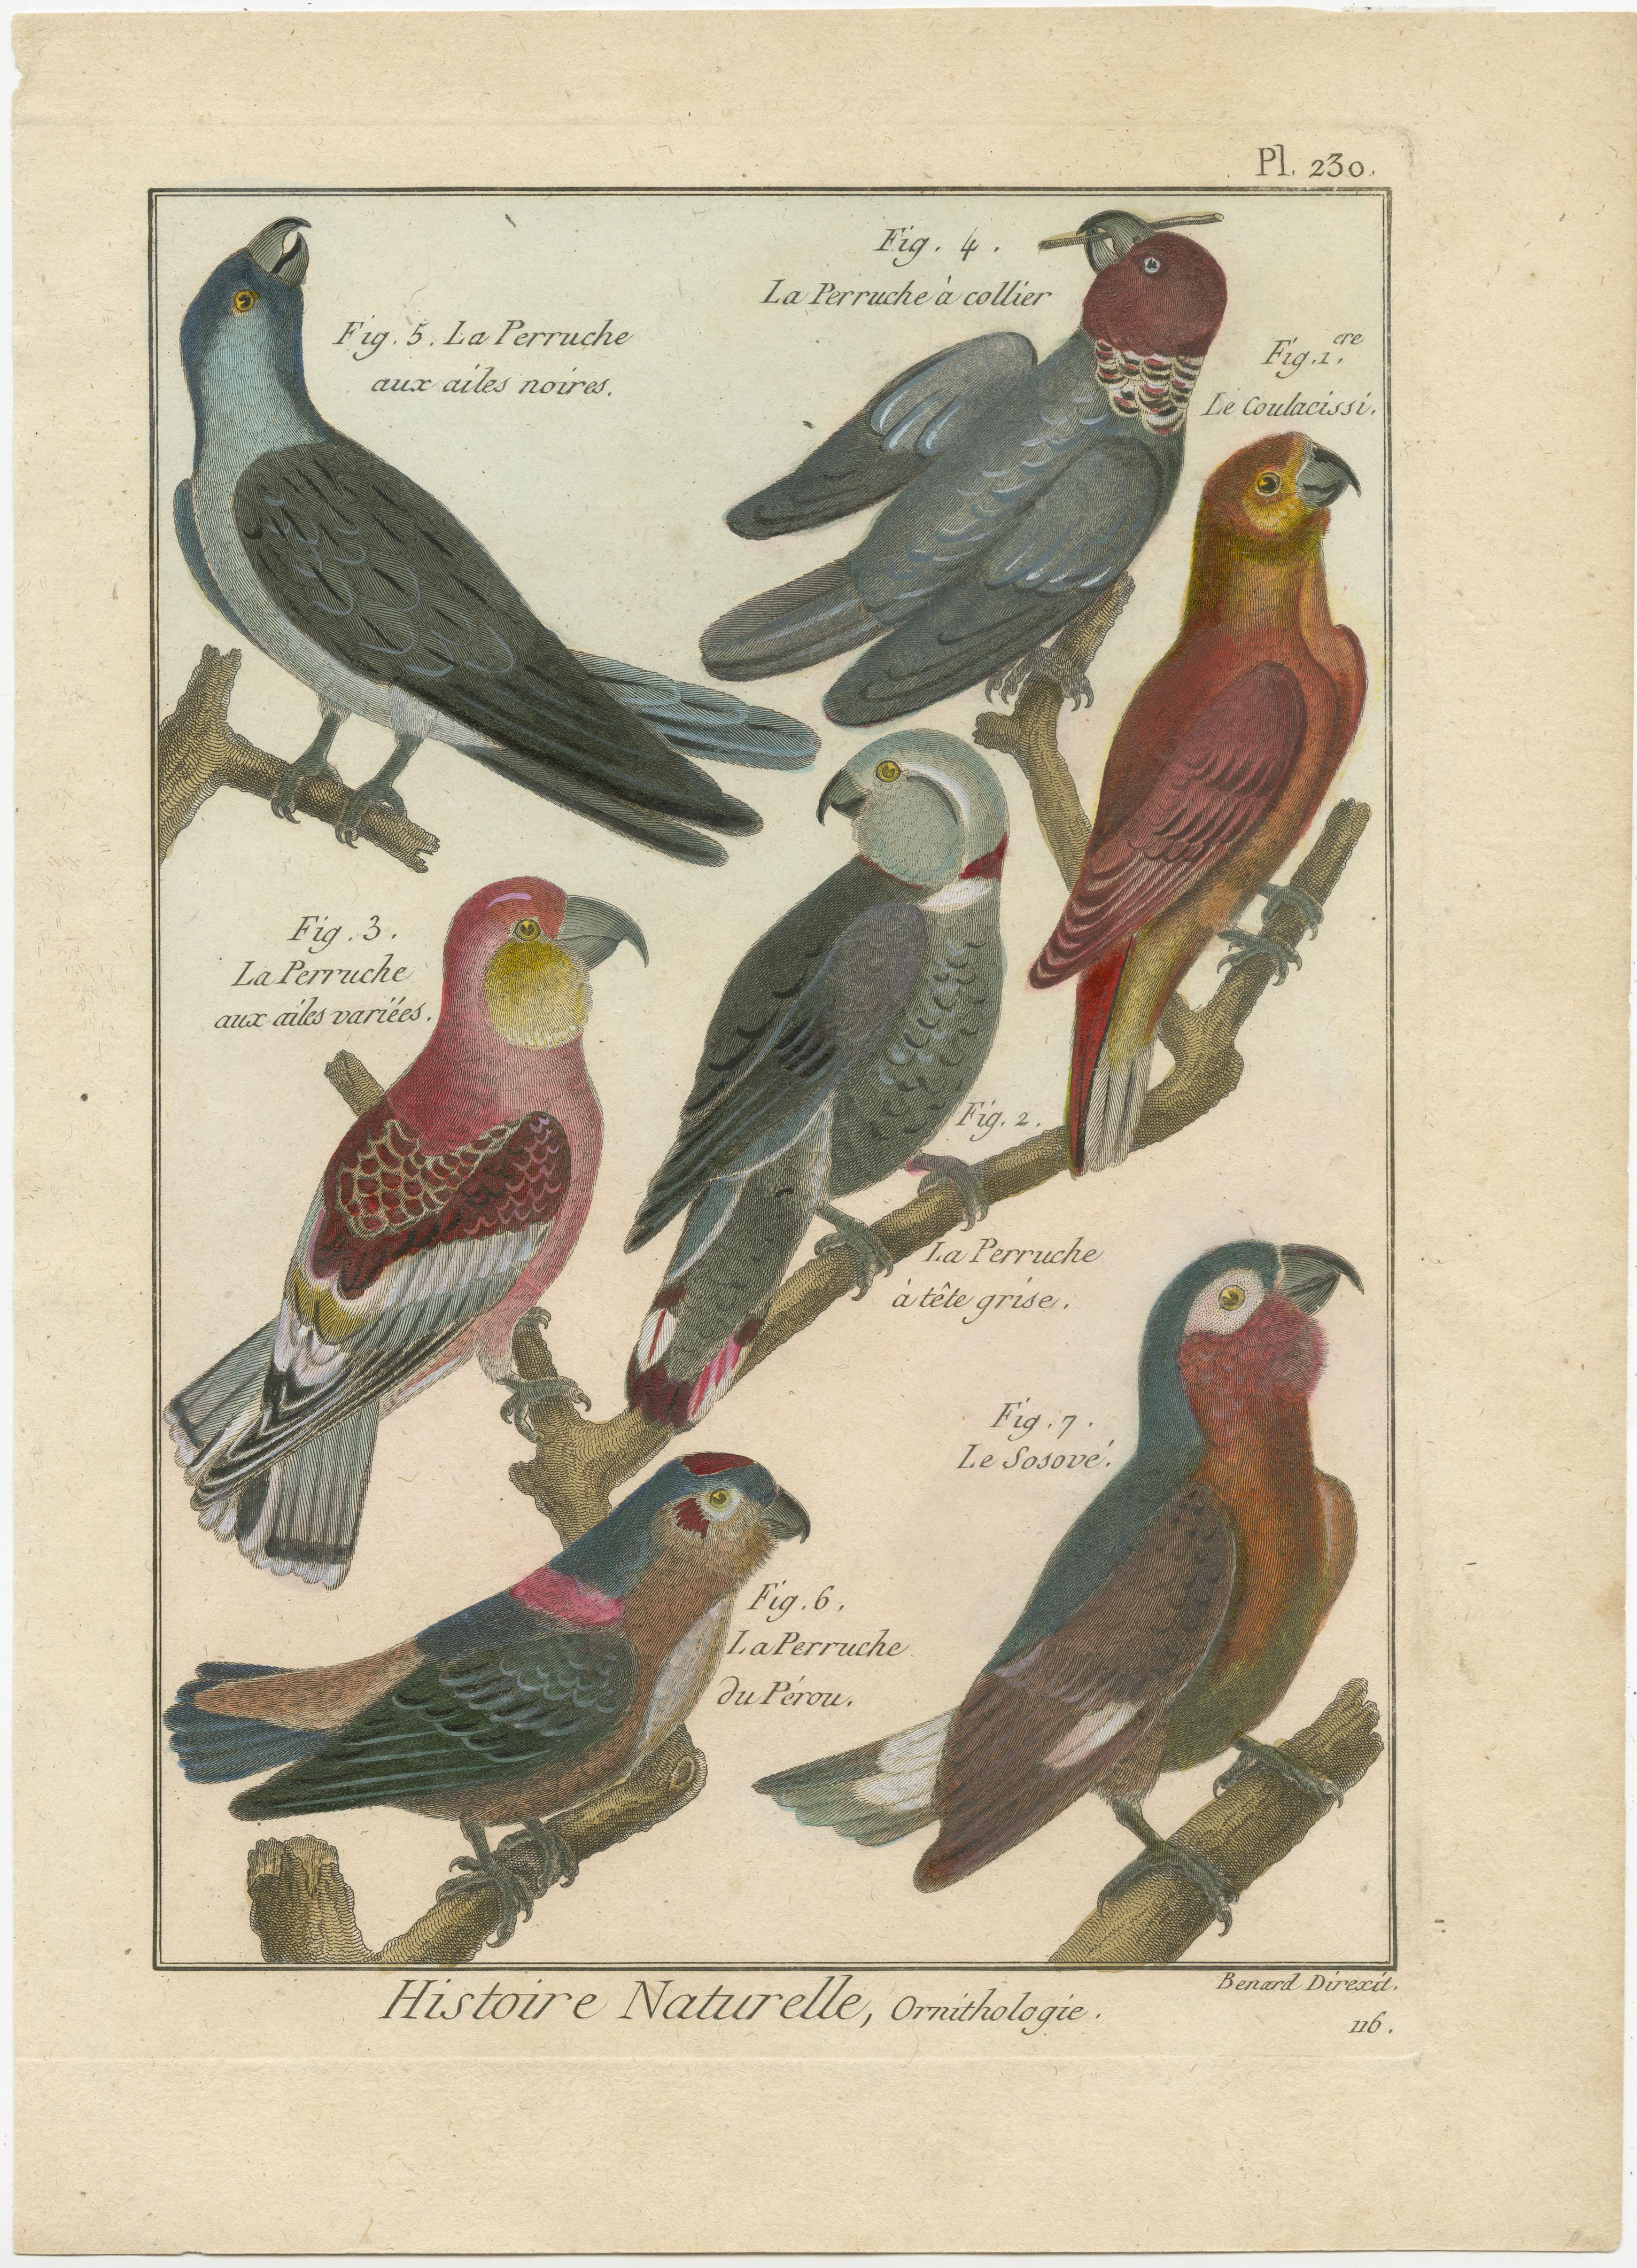 An authentic, perfect and bright, originally hand-colored, illustration of 7 Parakeets: 
La Perruche aux ailes noires, La Perruche a collier, La Perruche aux ails variees, La Perruche du Perou and La Perruche a tete grise. It also depicts Le